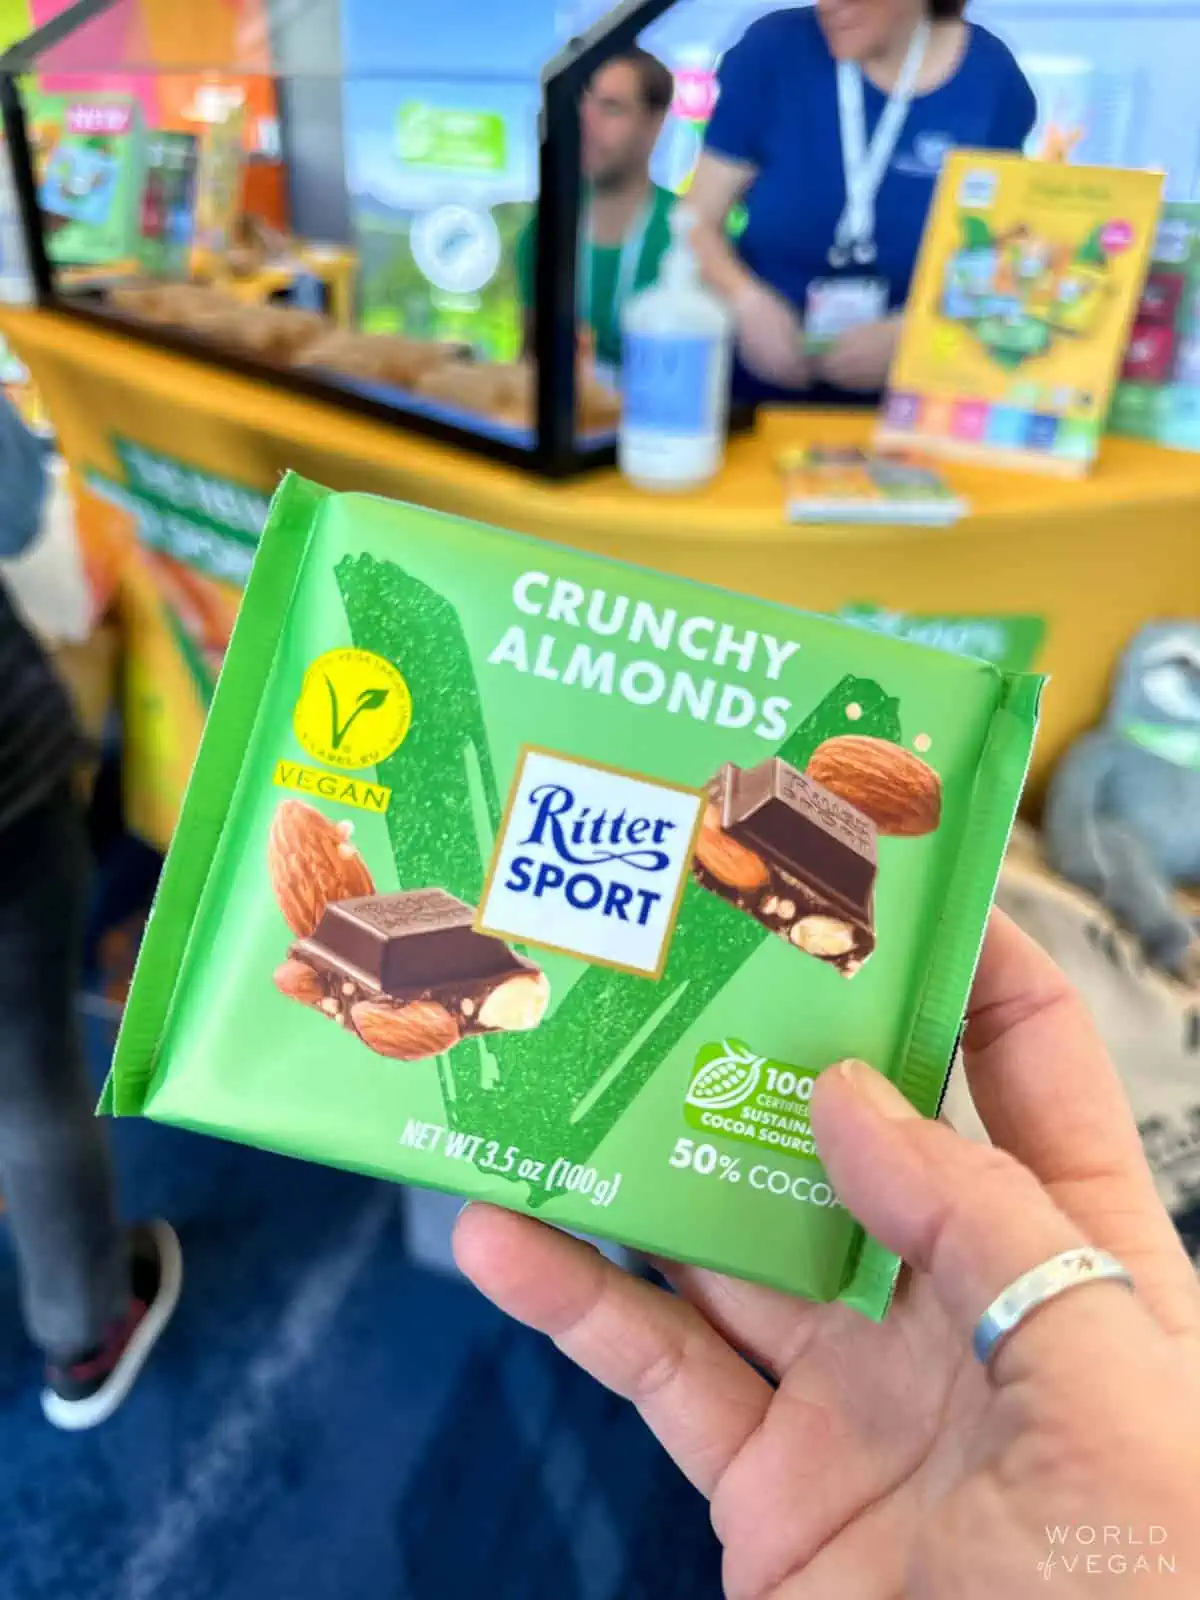 A package of Ritter Sport vegan chocolate bar with crunchy almonds.